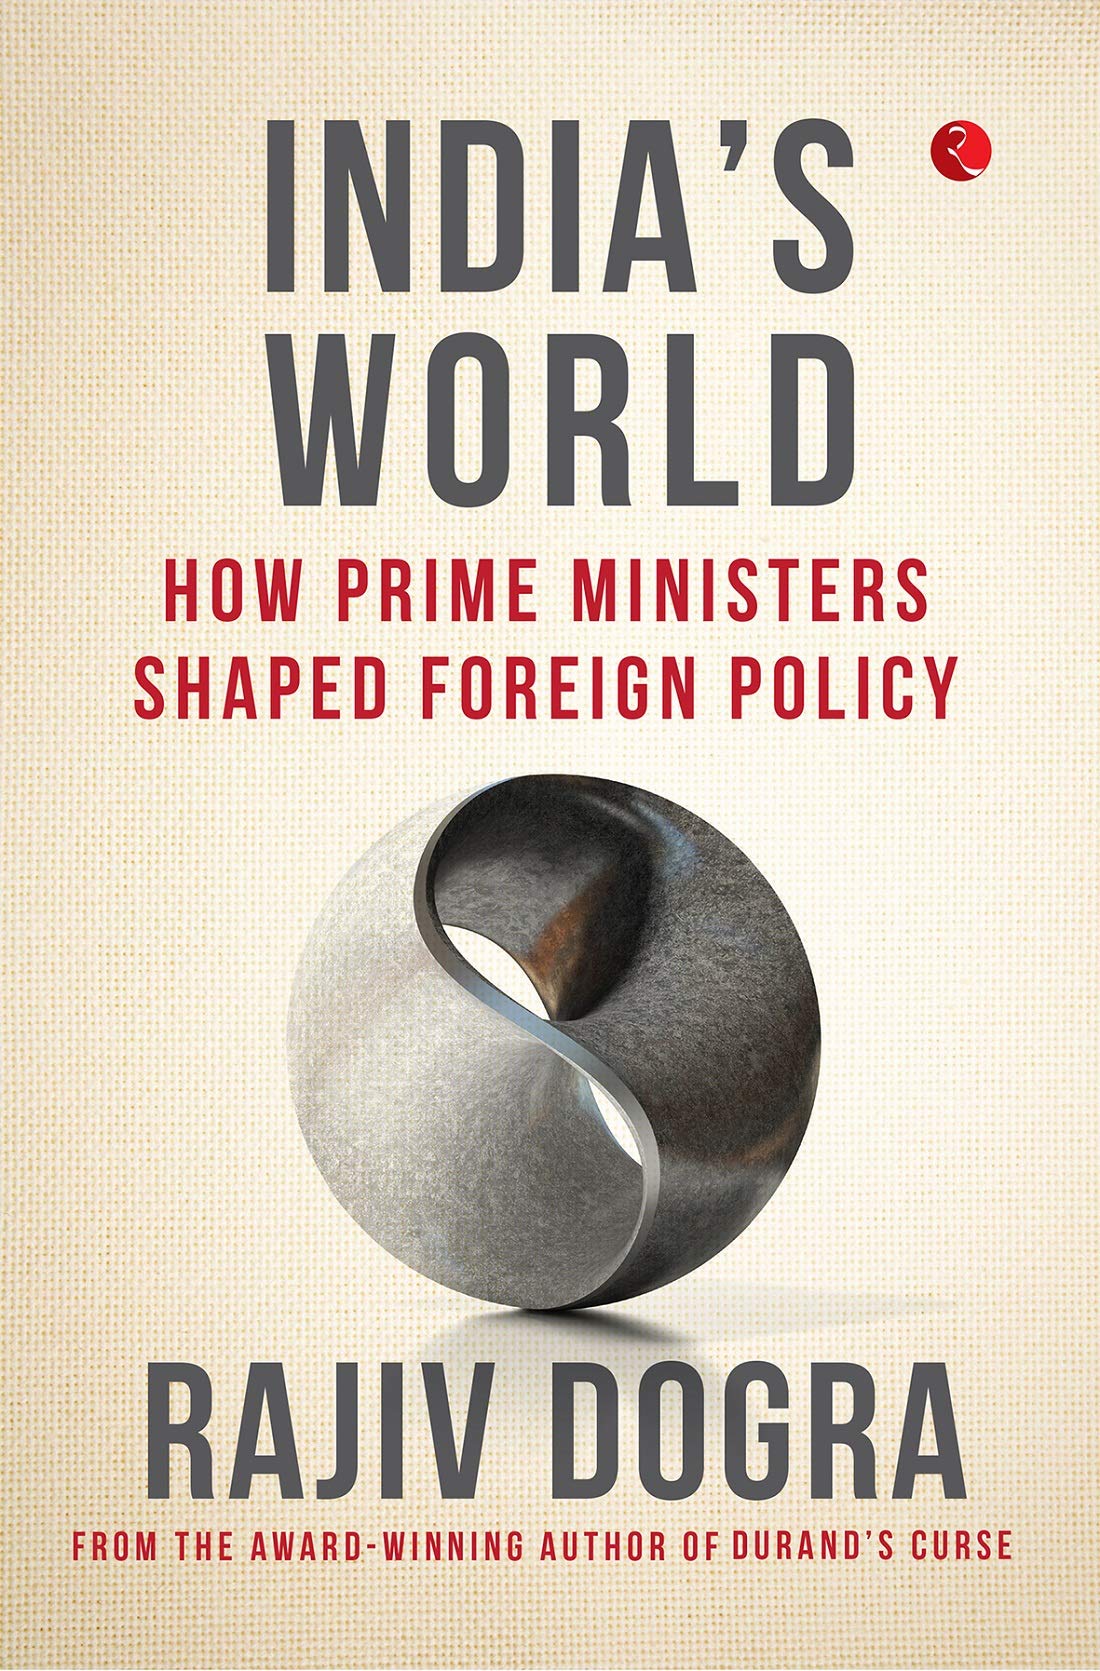 INDIA'S WORLD HOW PRIME MINISTERS SHAPED FOREIGN POLICY